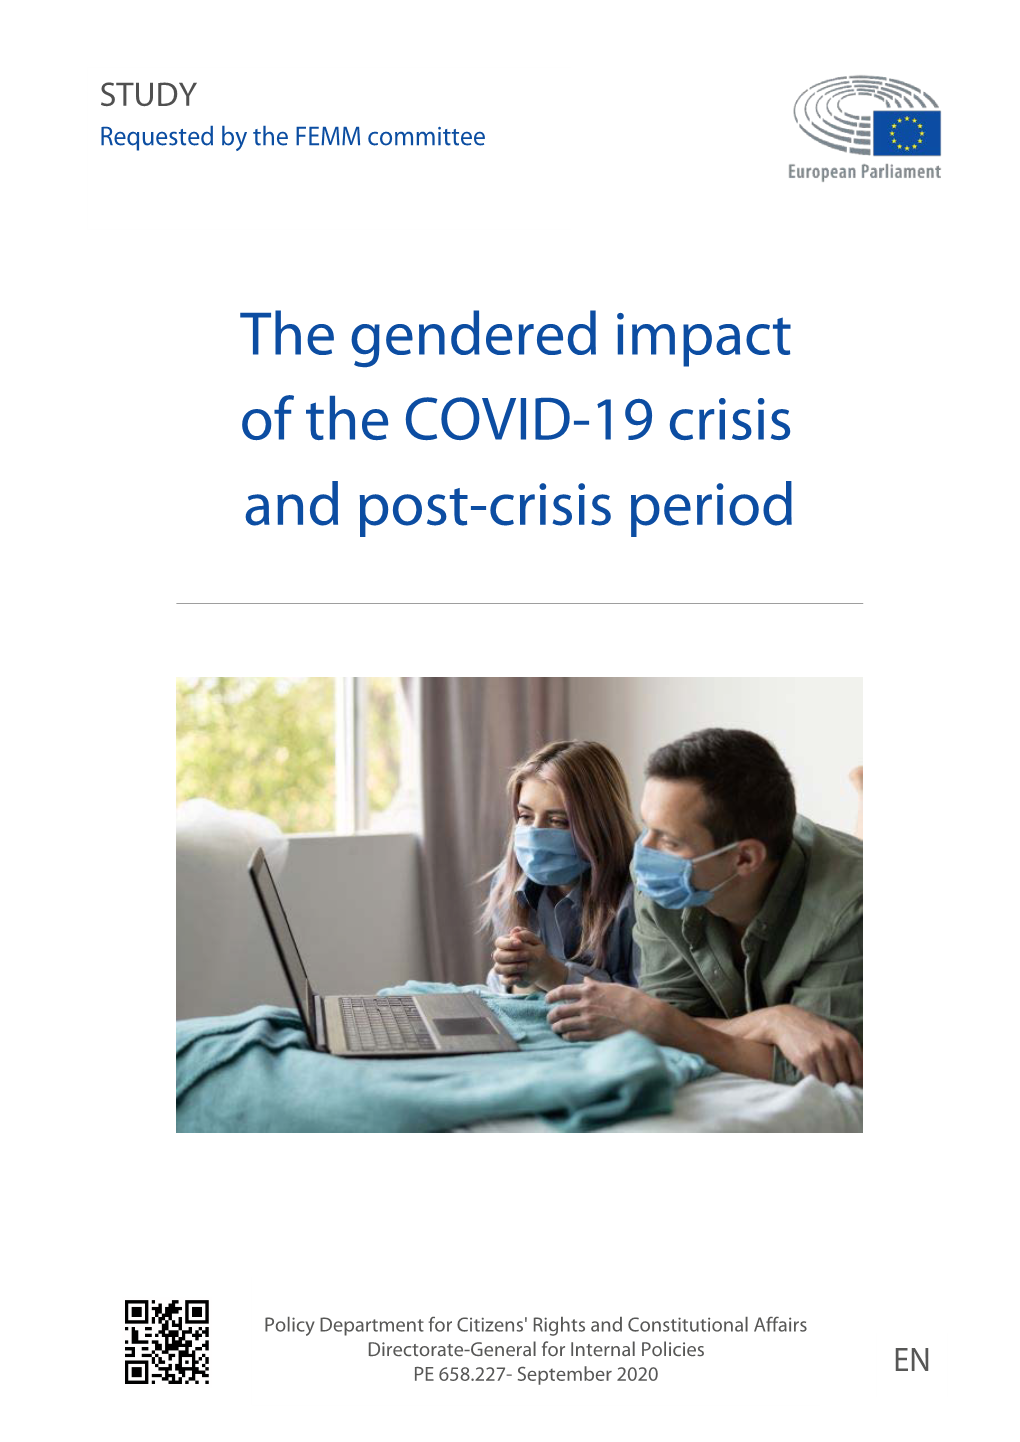 The Gendered Impact of the COVID-19 Crisis and Post-Crisis Period